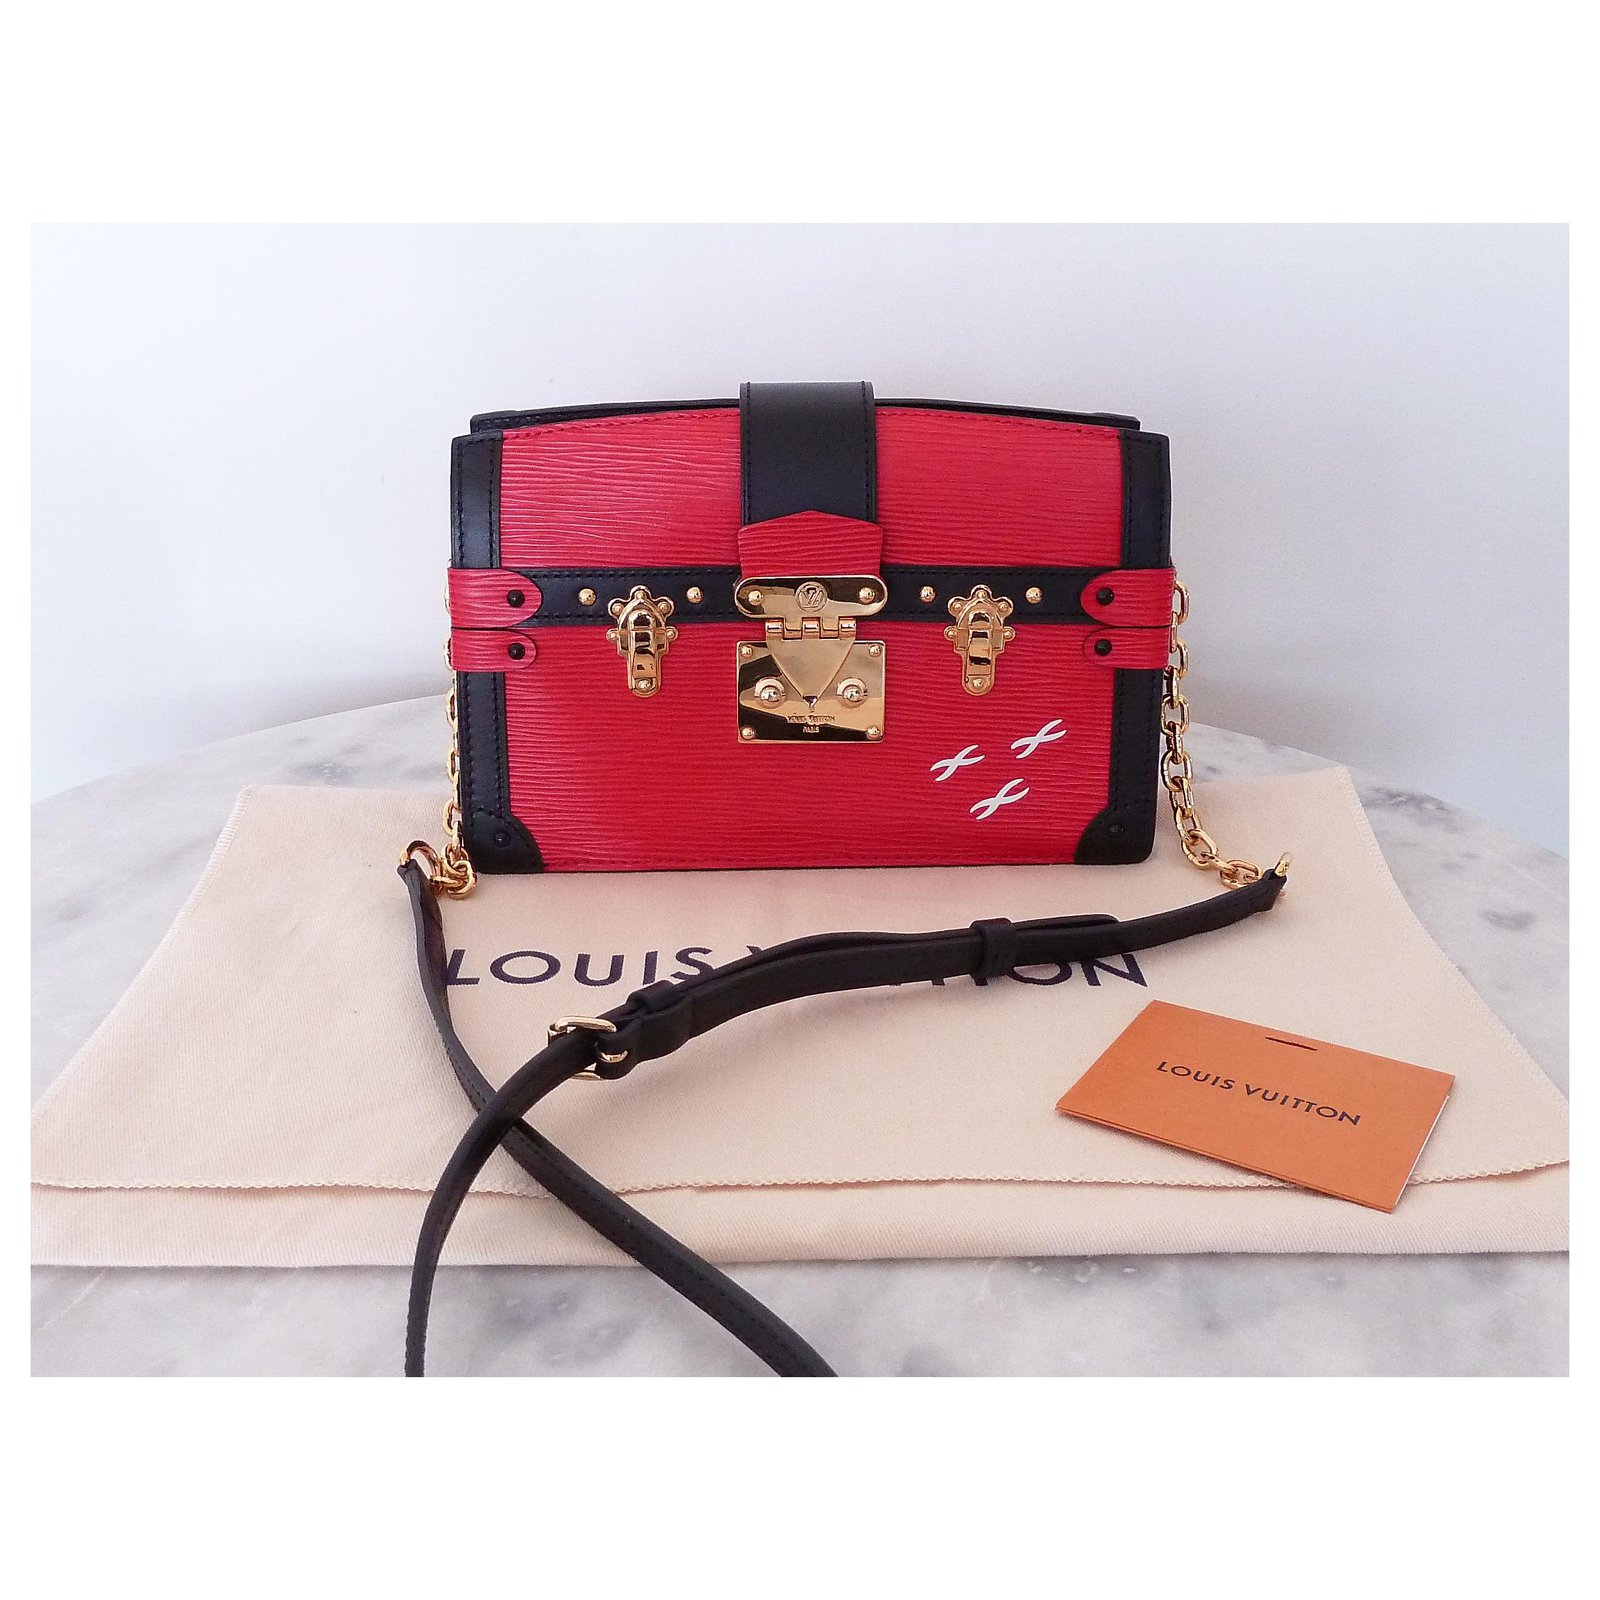 Louis Vuitton Trunk Clutch EPI Leather Red